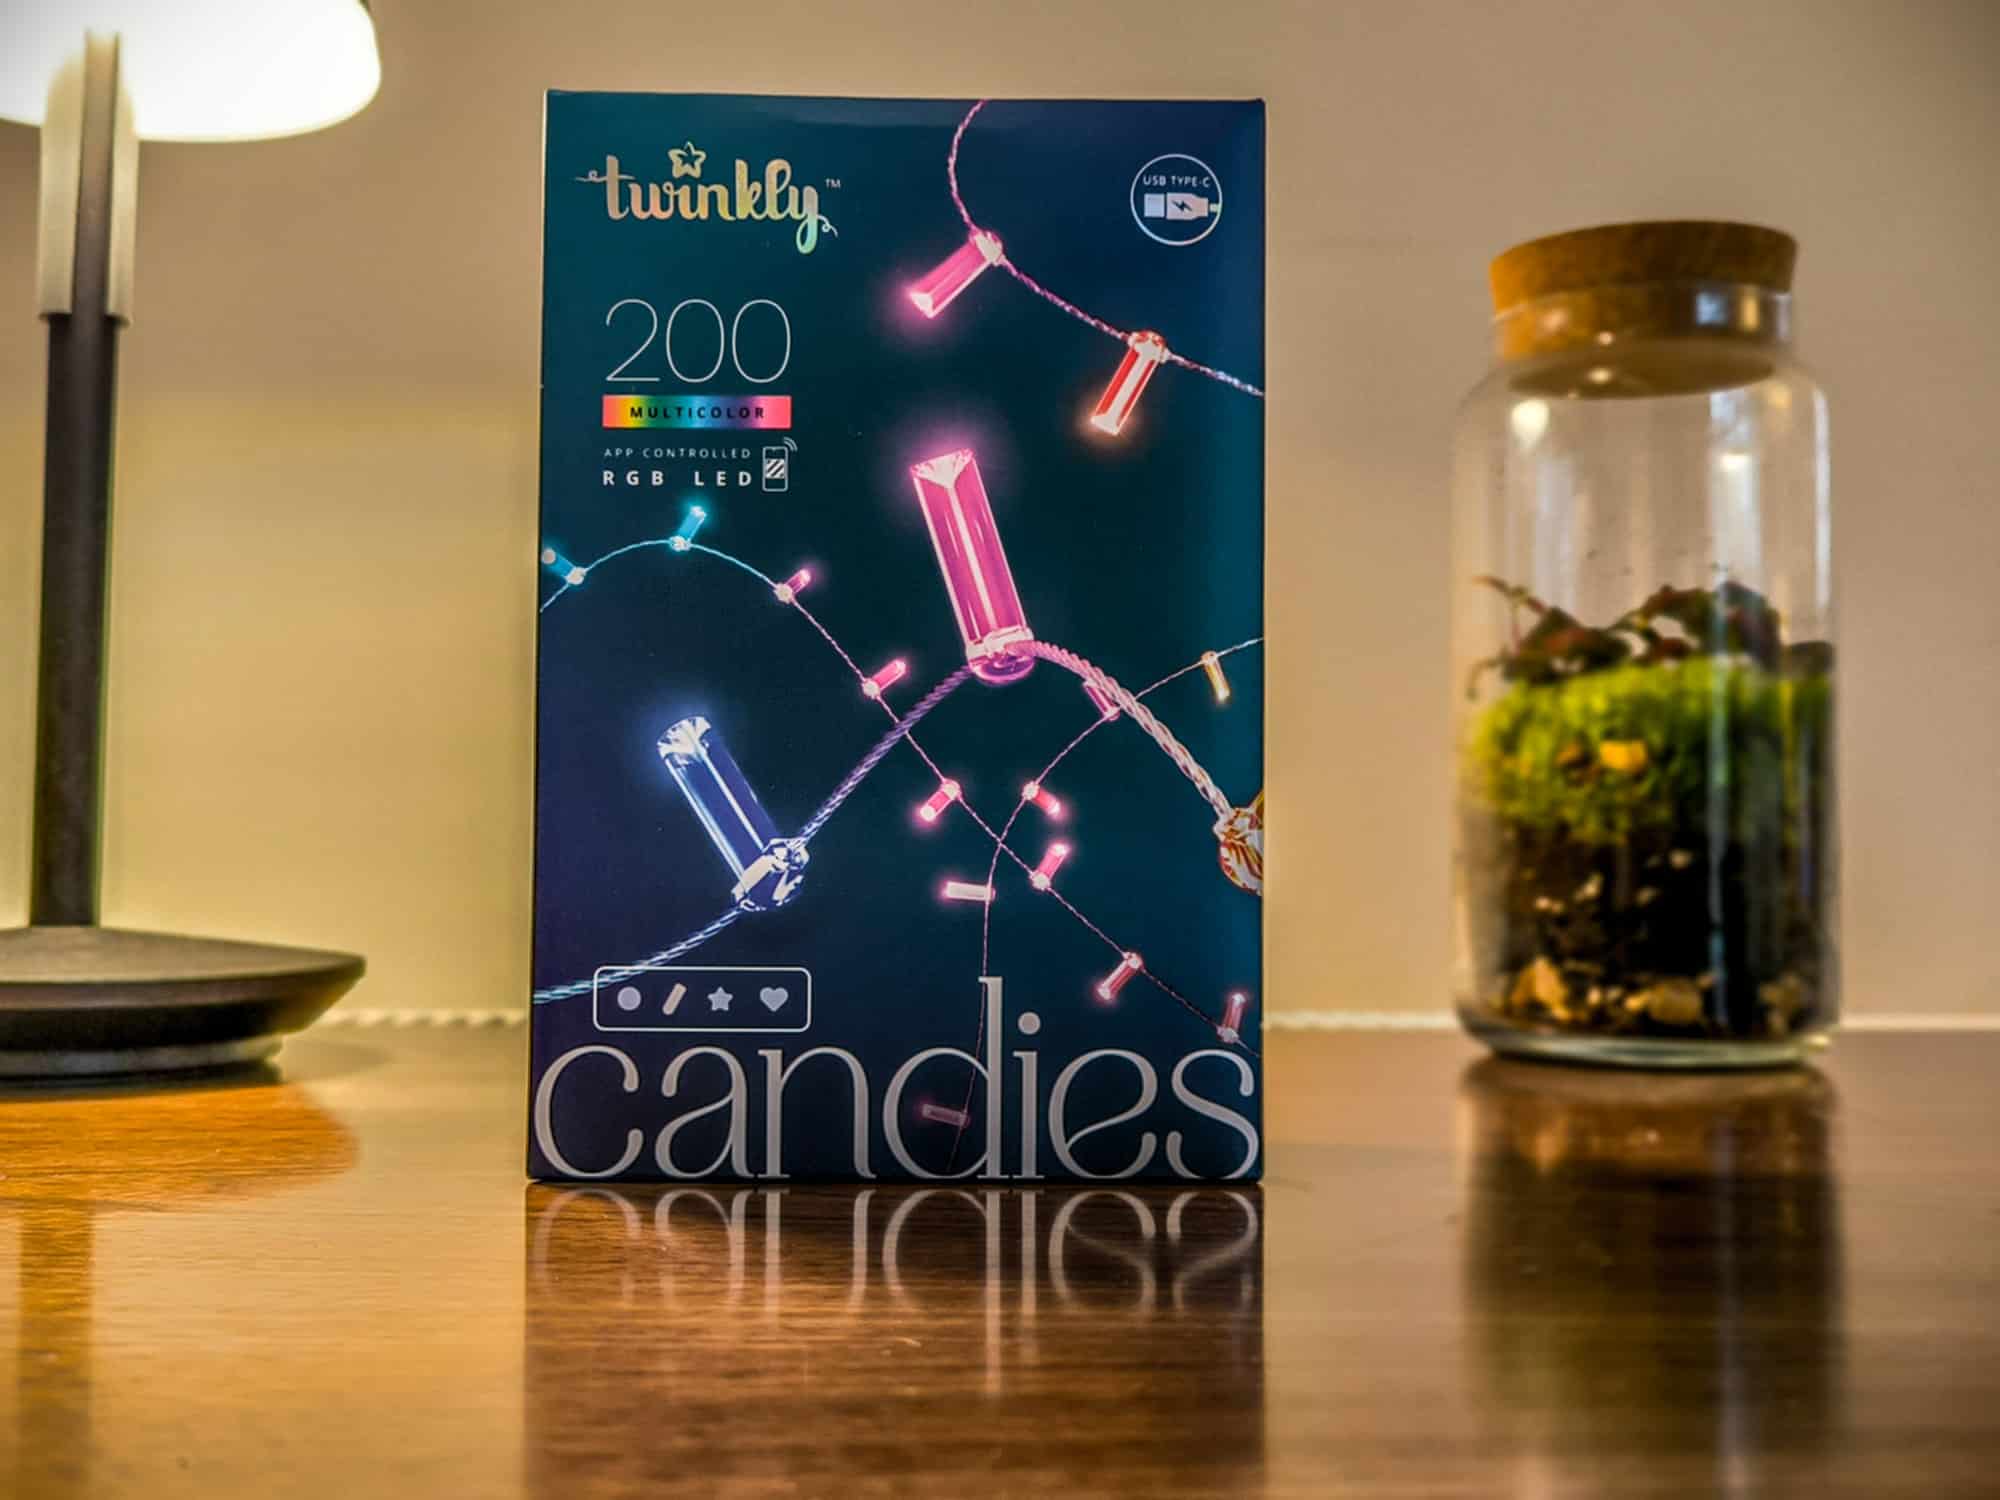 Twinkly Candies Review – USB-C power makes these smart string lights much more versatile for holiday decorations